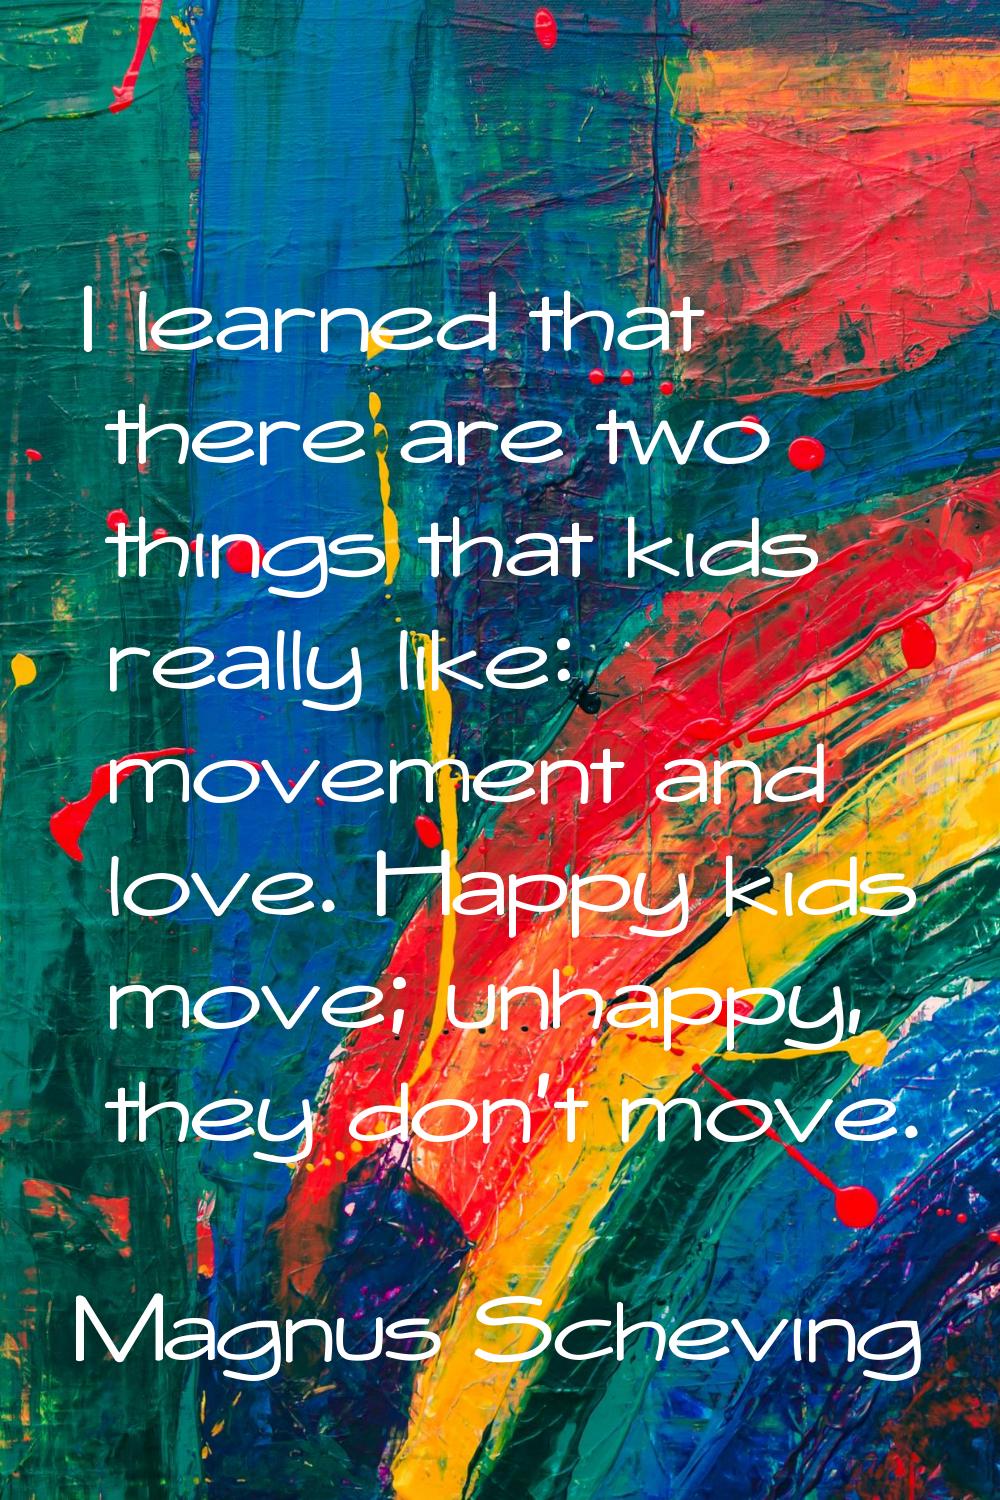 I learned that there are two things that kids really like: movement and love. Happy kids move; unha